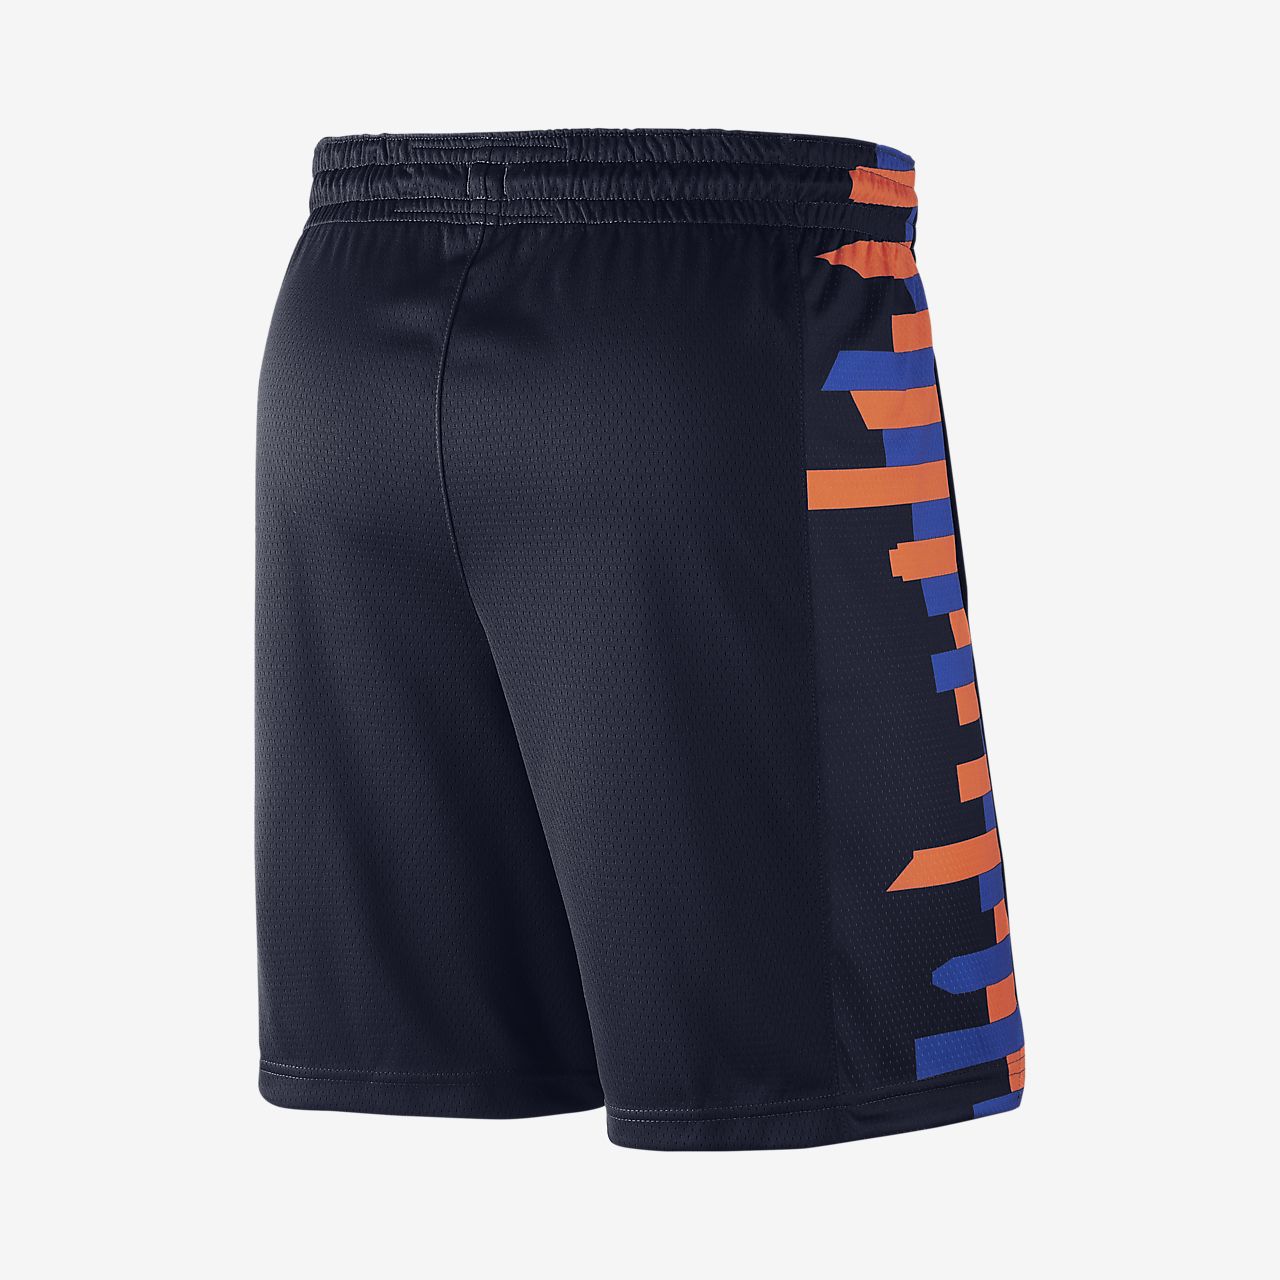 Knicks Shorts : Look fashionable in these baggy zoic shorts. - All ...